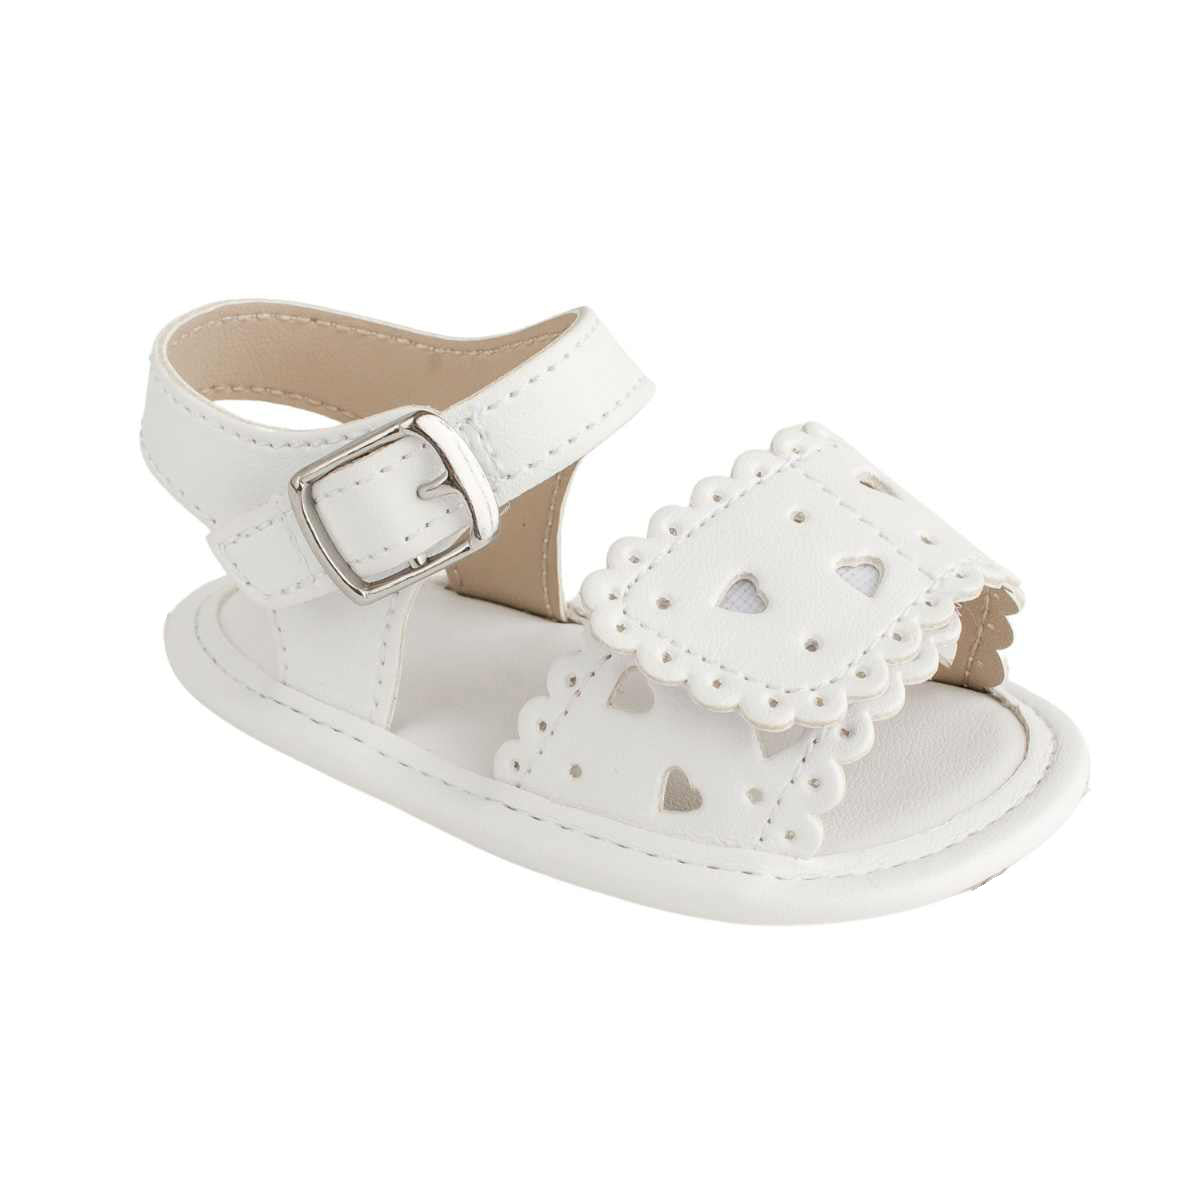 Baby Deer Patricia White Double Closure Sandals w/ Heart Accents 4555